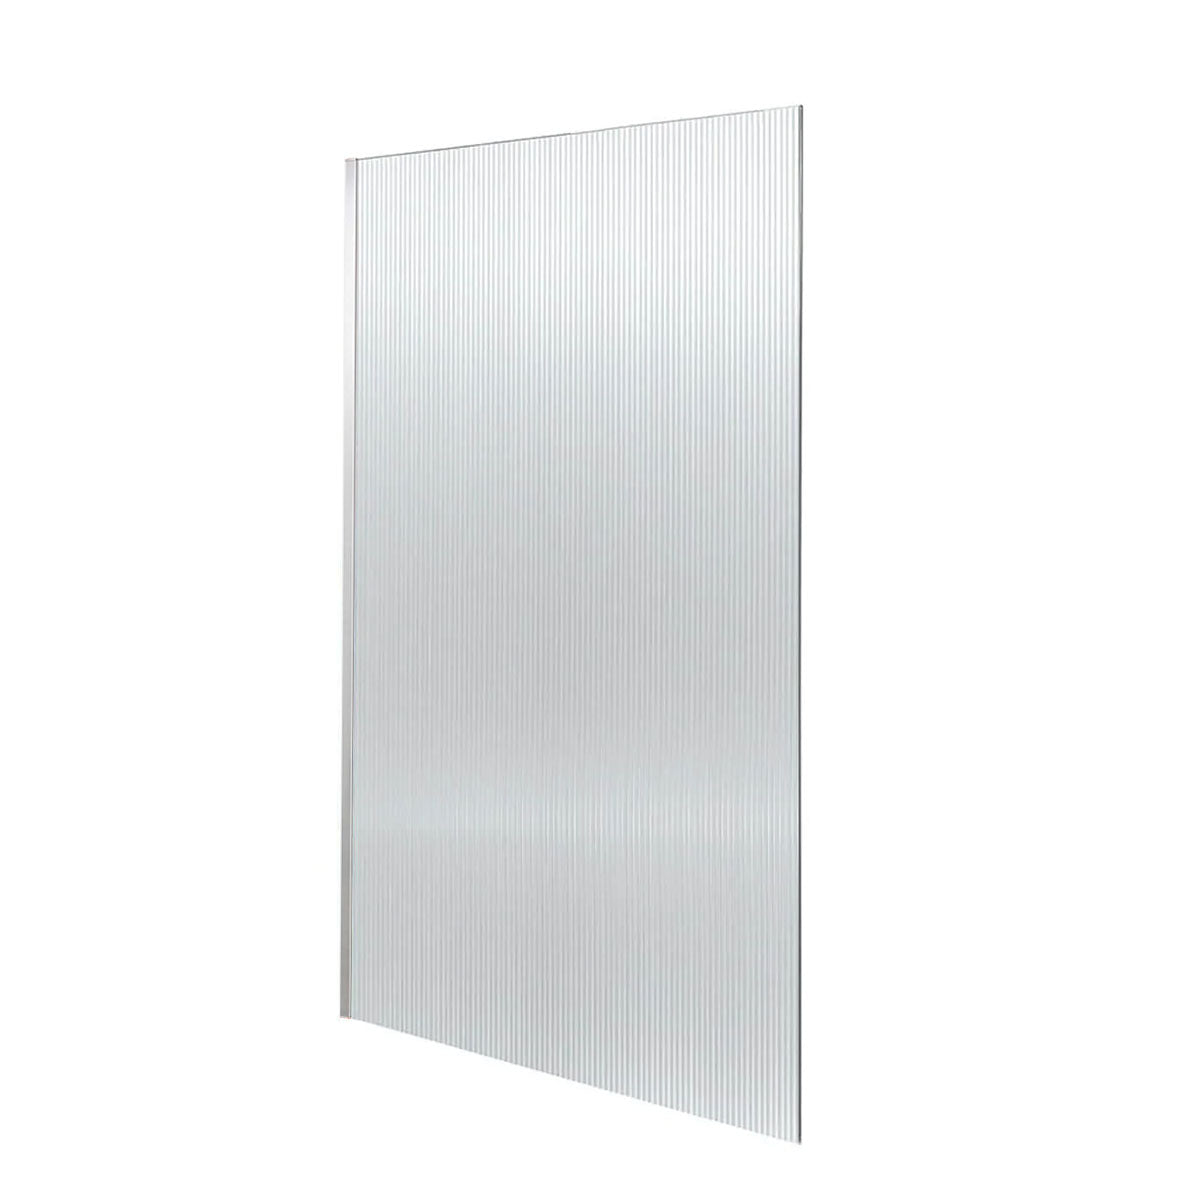 Granlusso 8mm Toughened Glass Shower Screen Panel Fluted Fixed chrome